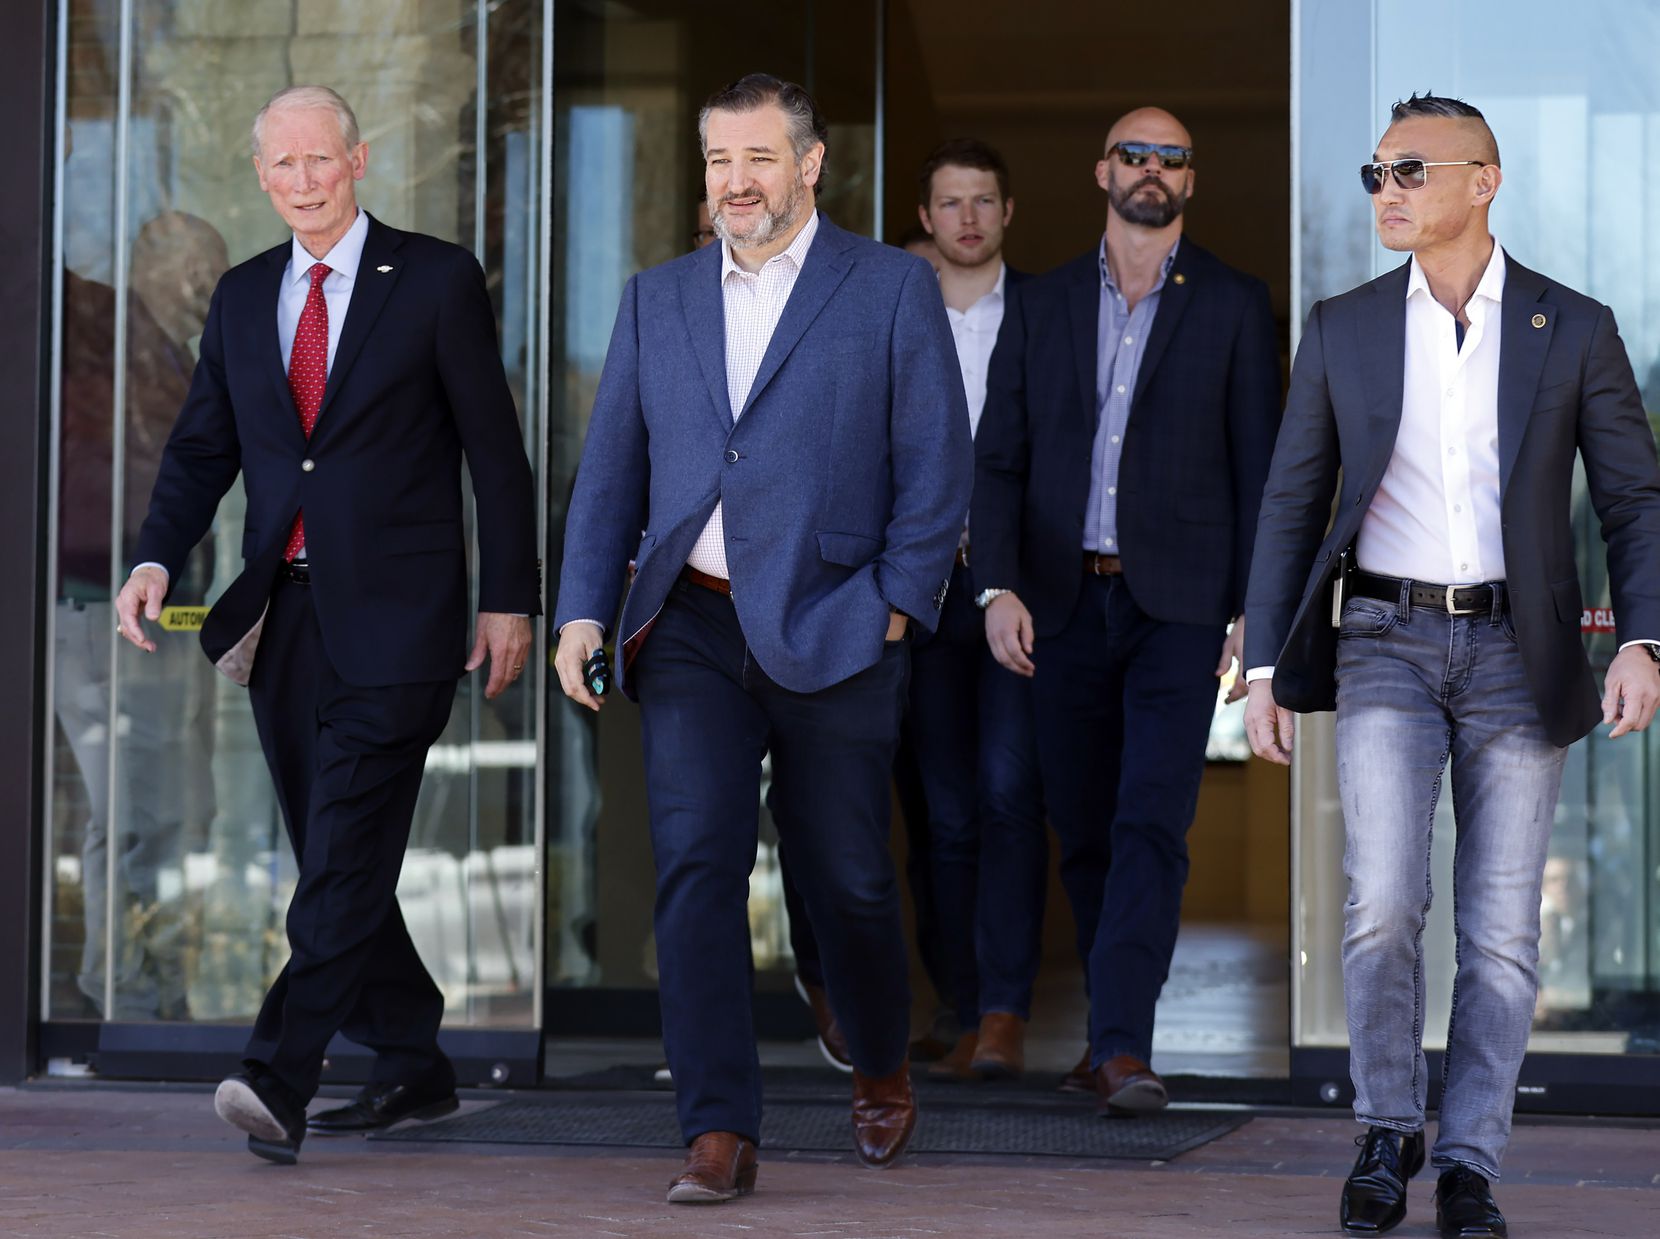 Flanked by Colleyville Mayor Richard Newton (left), Sen. Ted Cruz leaves Colleyville City Hall following a roundtable meeting with city officials and Jewish community leaders Friday.